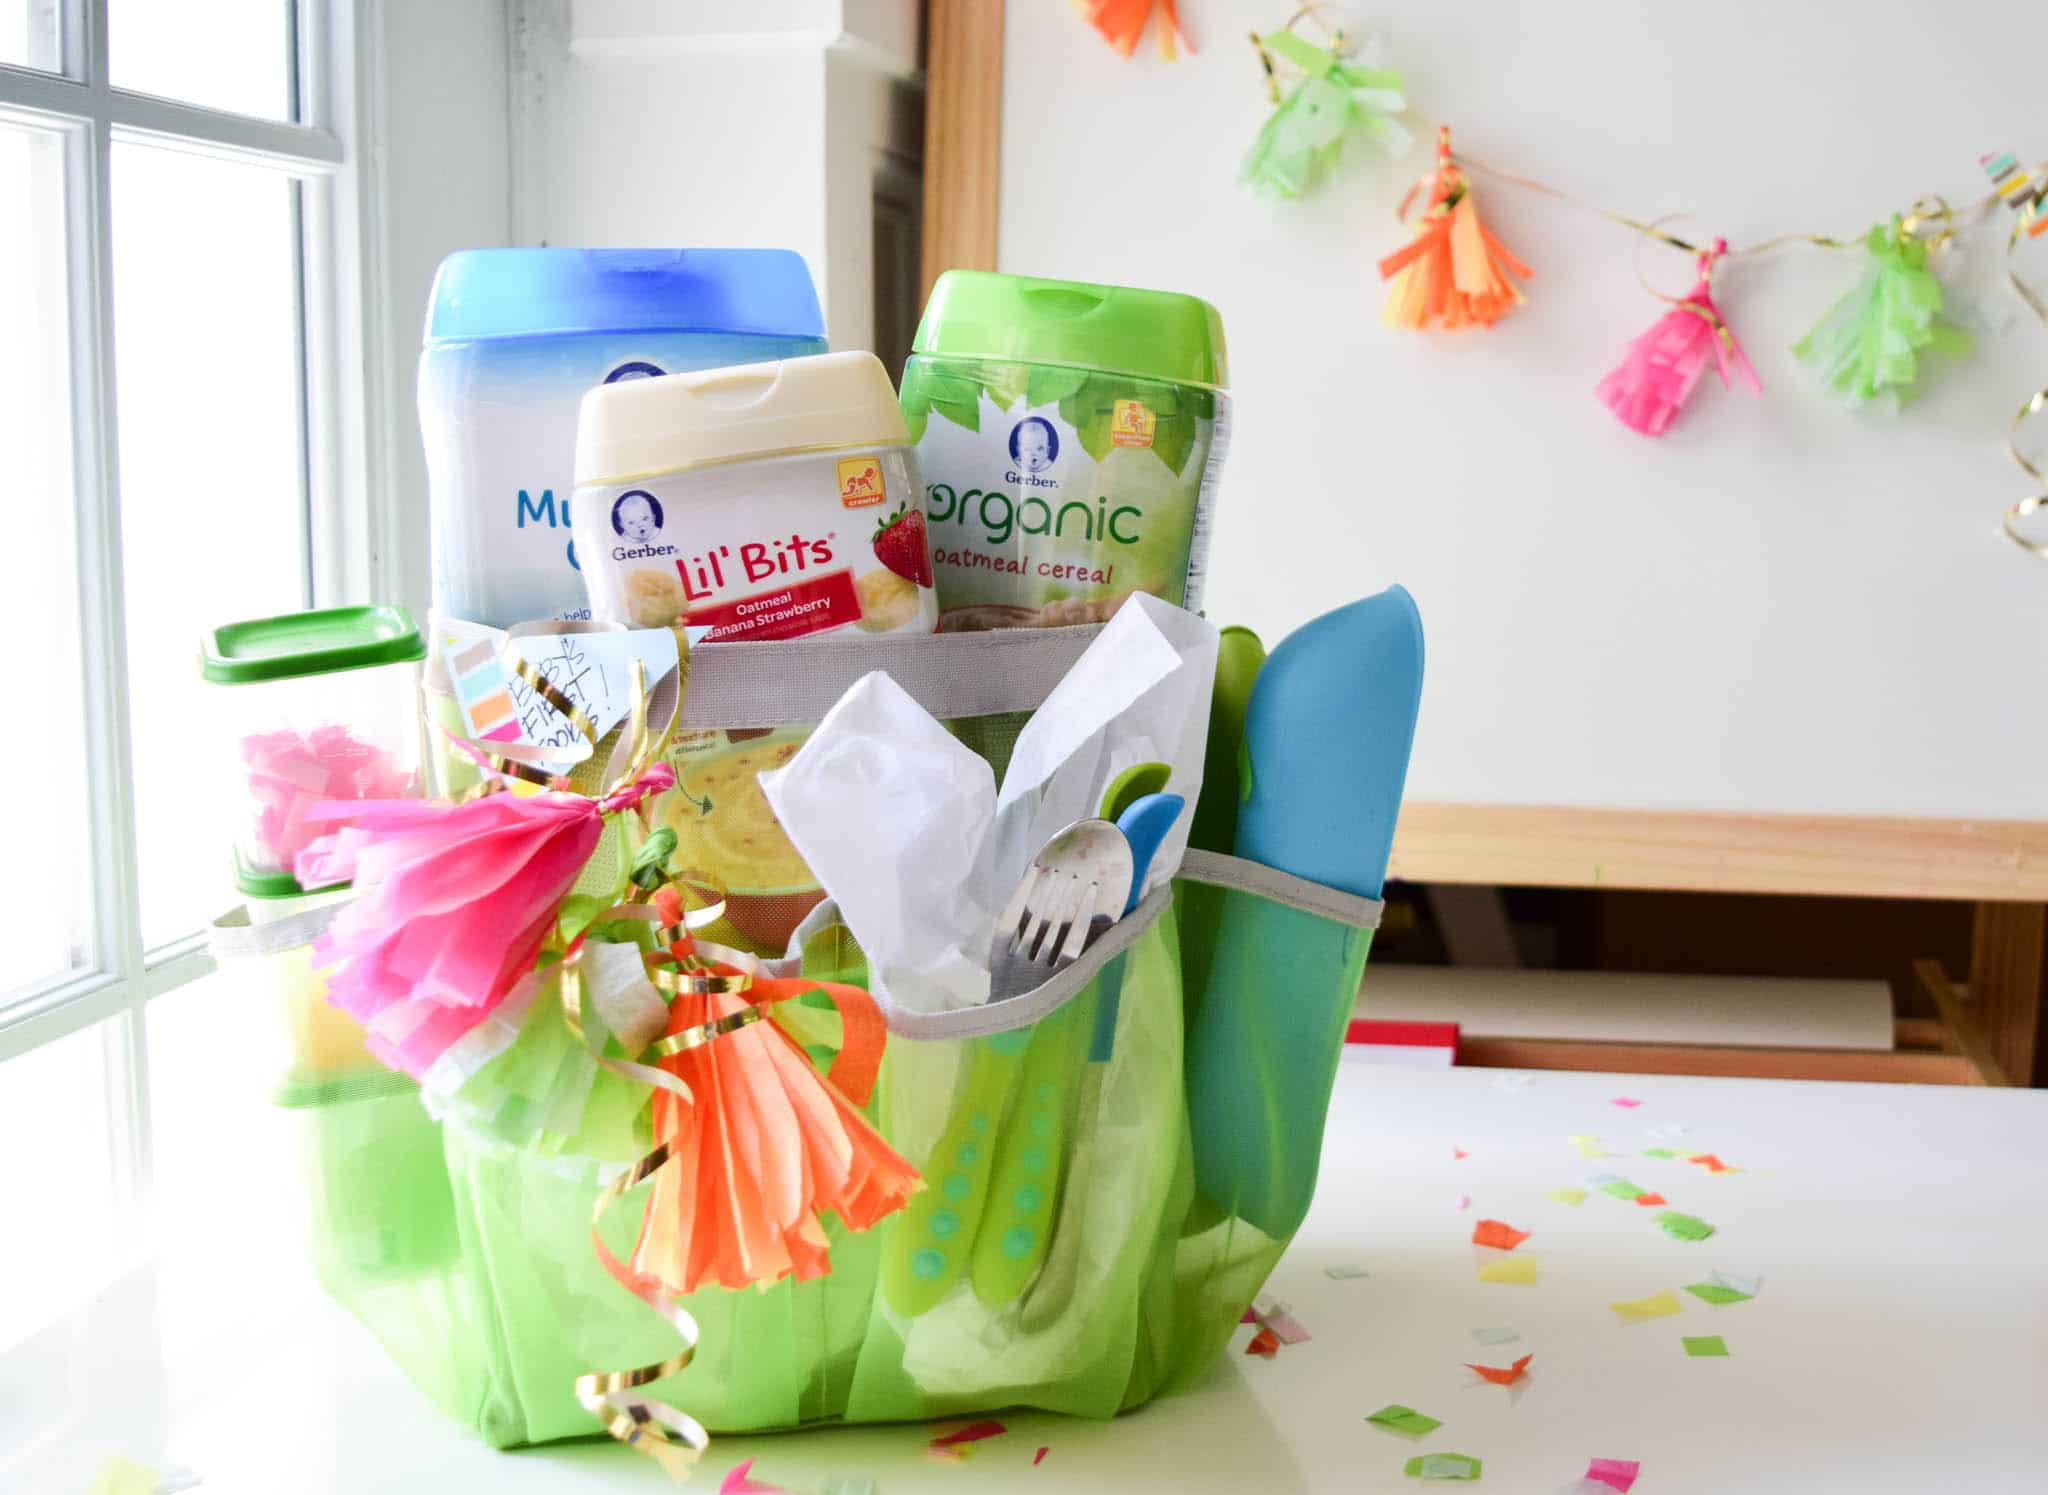 Gift Ideas For Mom To Be At Baby Shower
 Create a Baby Shower Gift That Mom To Be Will Love for